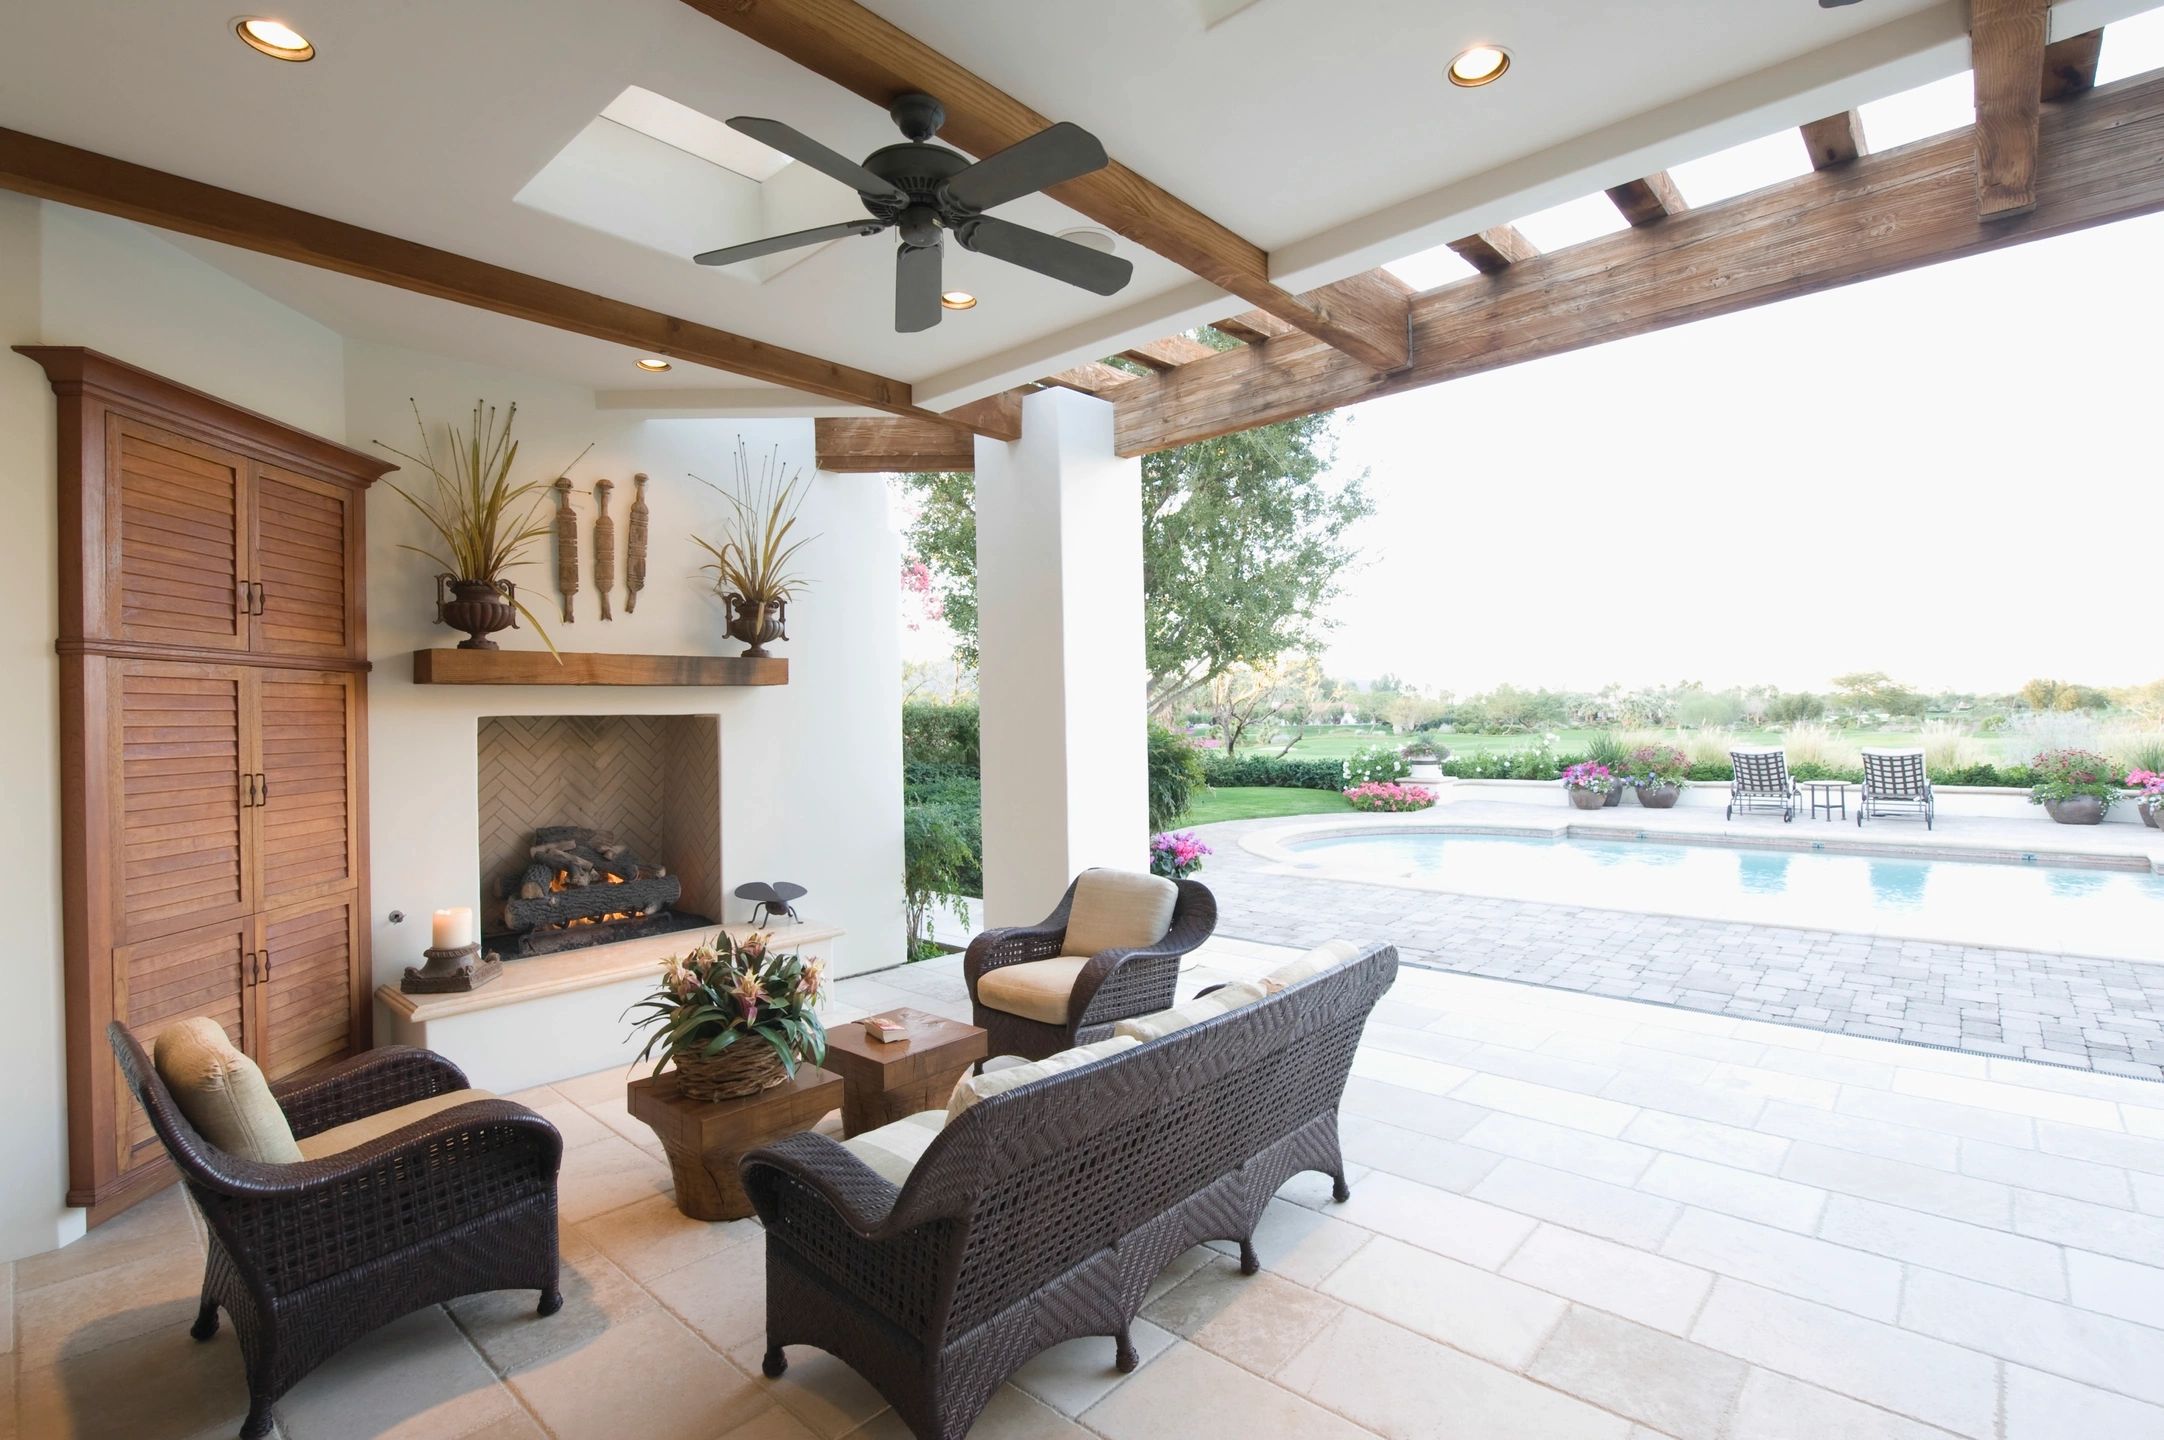 Lovely Outdoor Living with pool and fireplace
